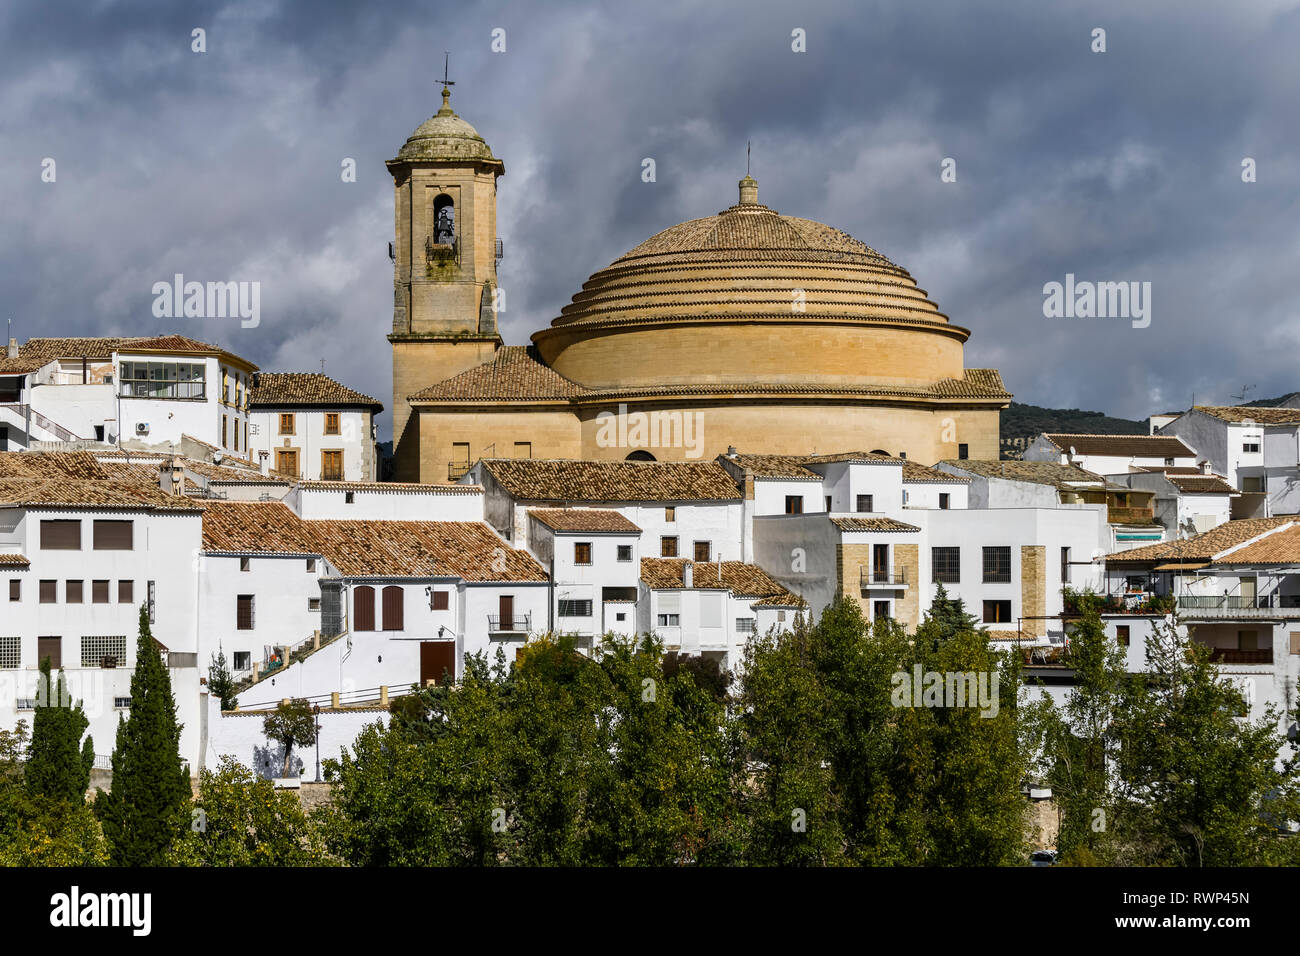 Bell tower and domed roof of Iglesia de la Encarnacion church with white houses below; Montefrio, Province of Granada, Spain Stock Photo